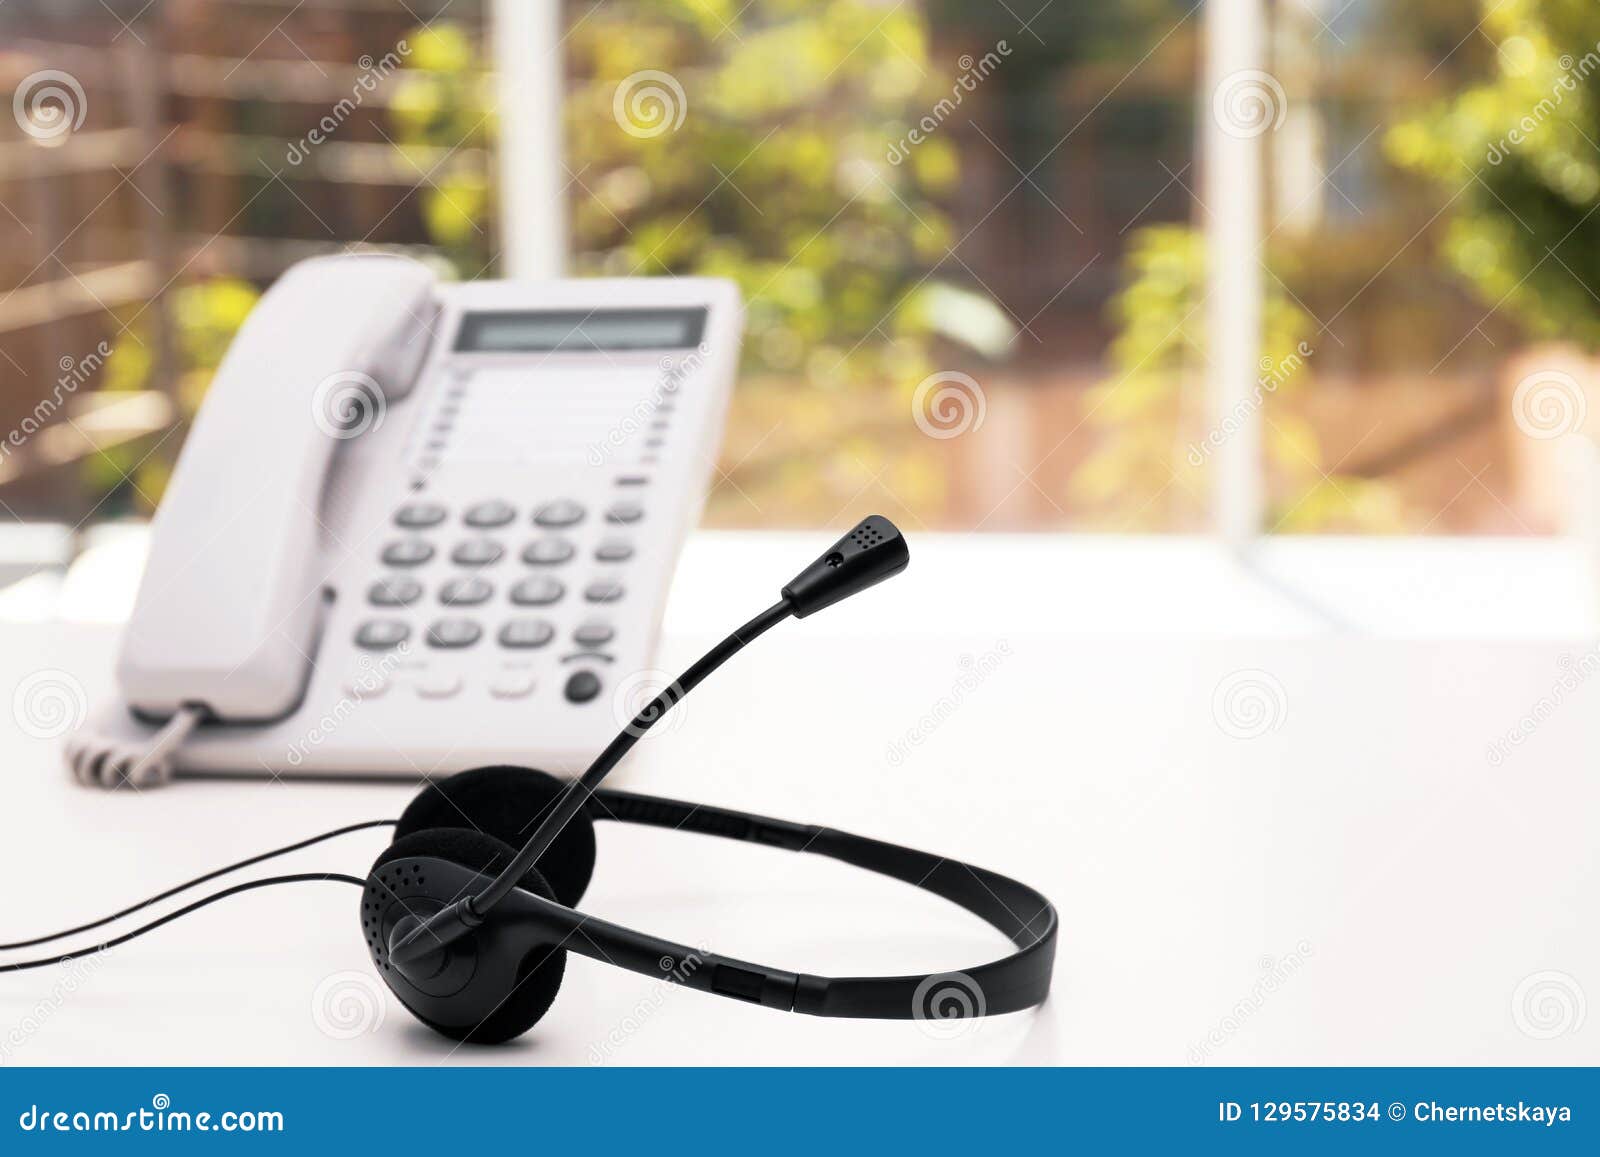 Headset And Desk Phone On Table Space For Text Stock Photo